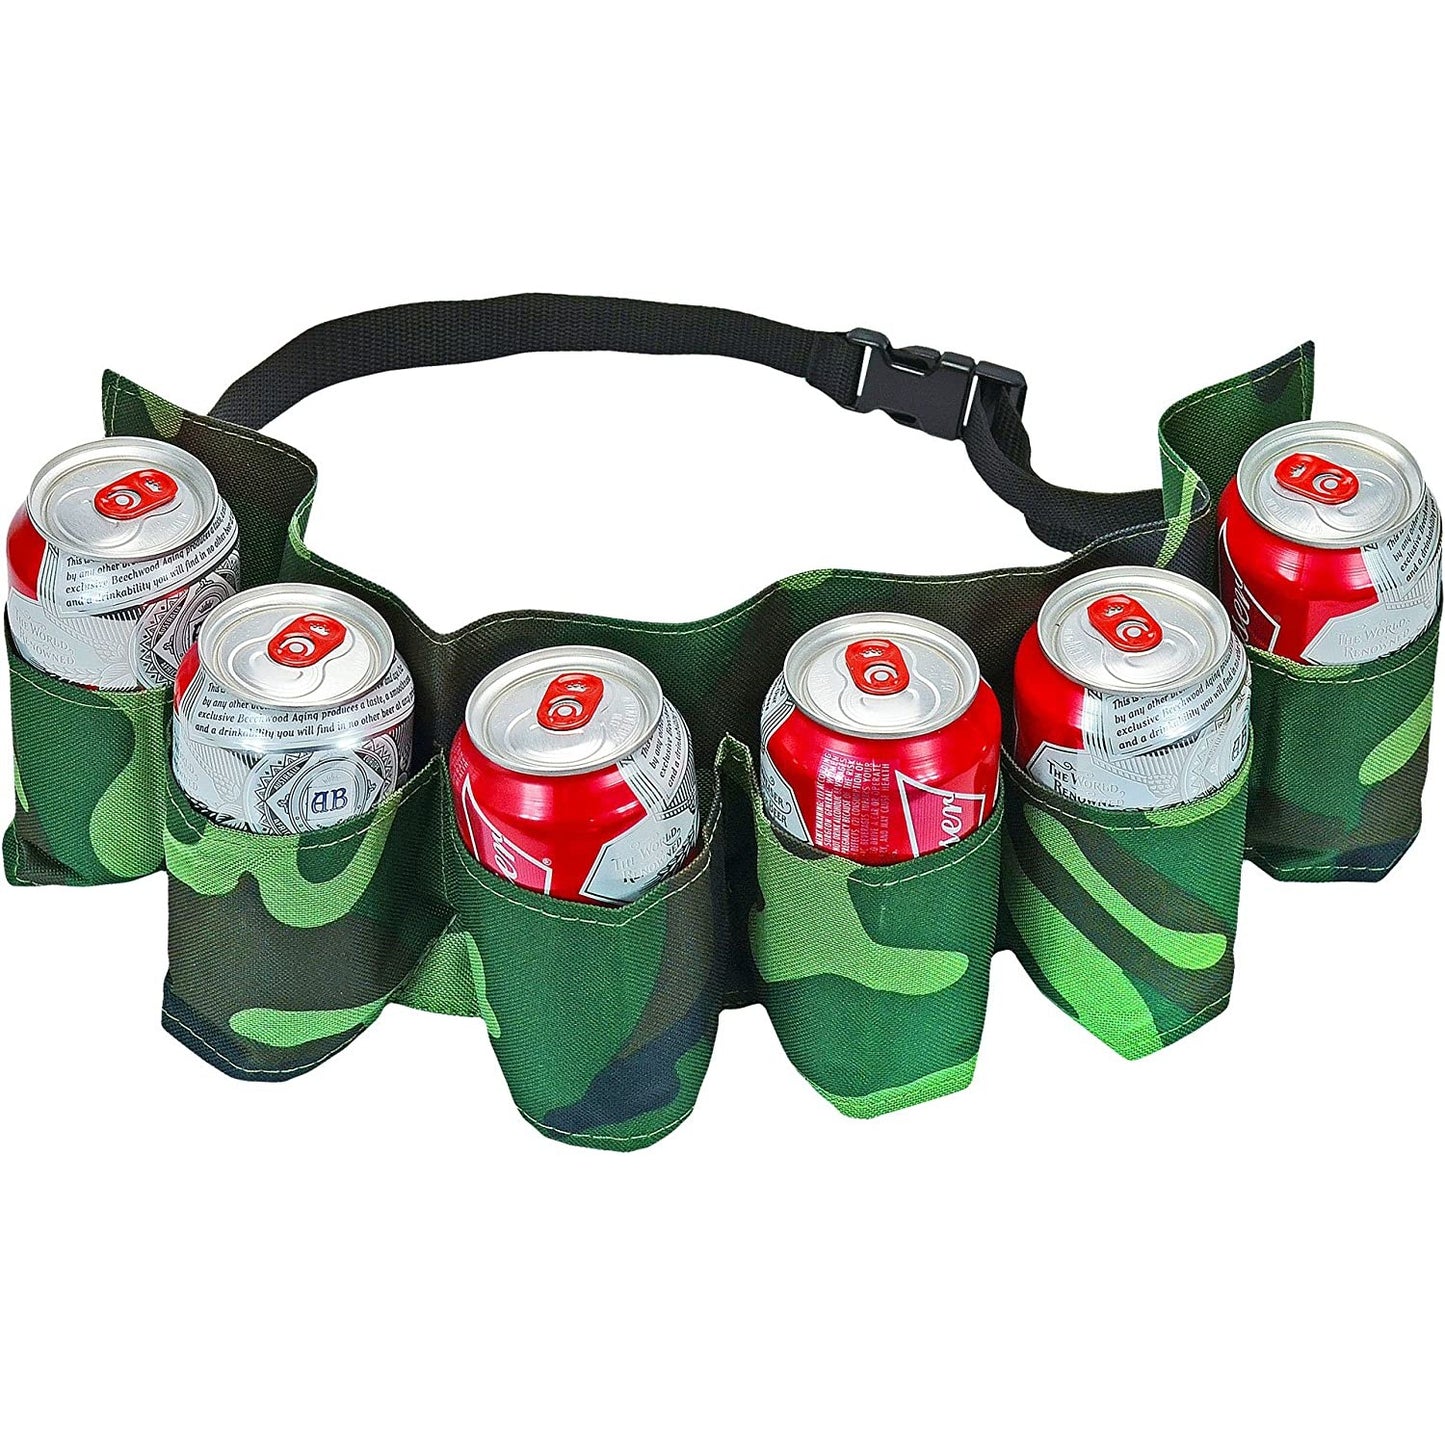 A green camouflage colored belt which has 6 pockets in the front to hold 6 cans of beer or soda.